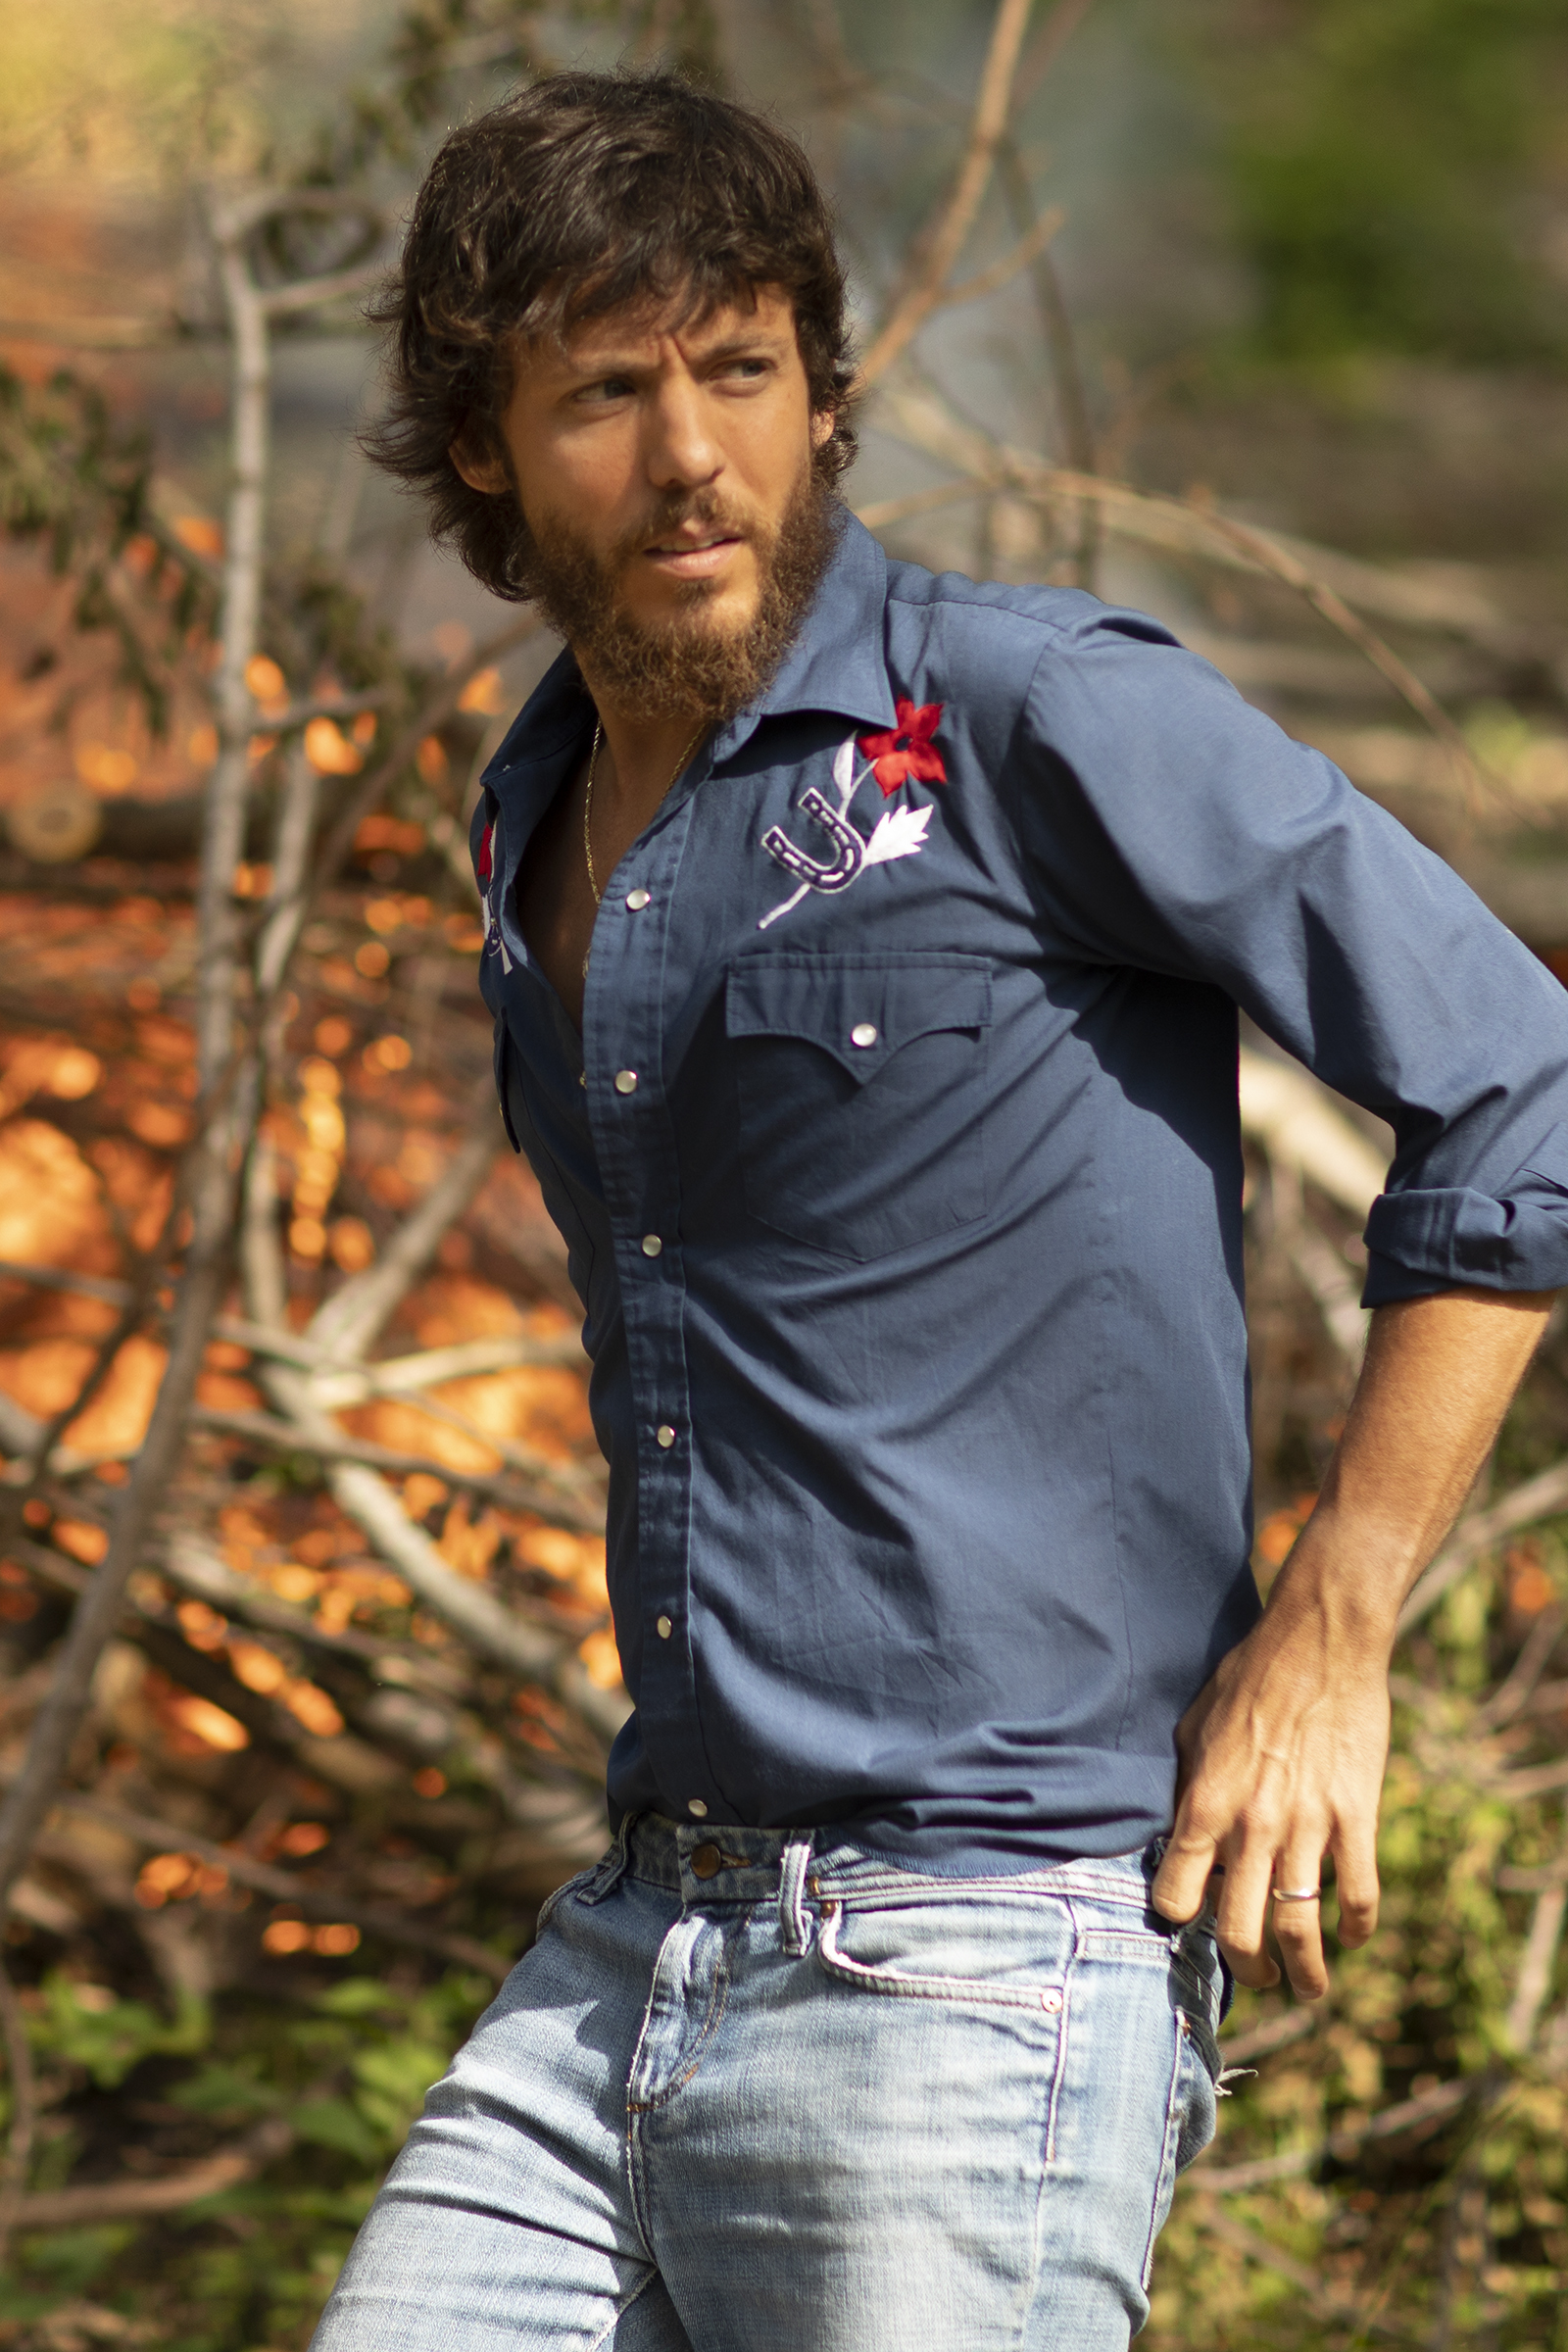 CHRIS JANSON TO APPEAR AS SPECIAL GUEST AT BASS PRO SHOPS US OPEN NATIONAL BASS FISHING AMATEUR TEAM CHAMPIONSHIPS EVENT THIS SUNDAY, MARCH 13